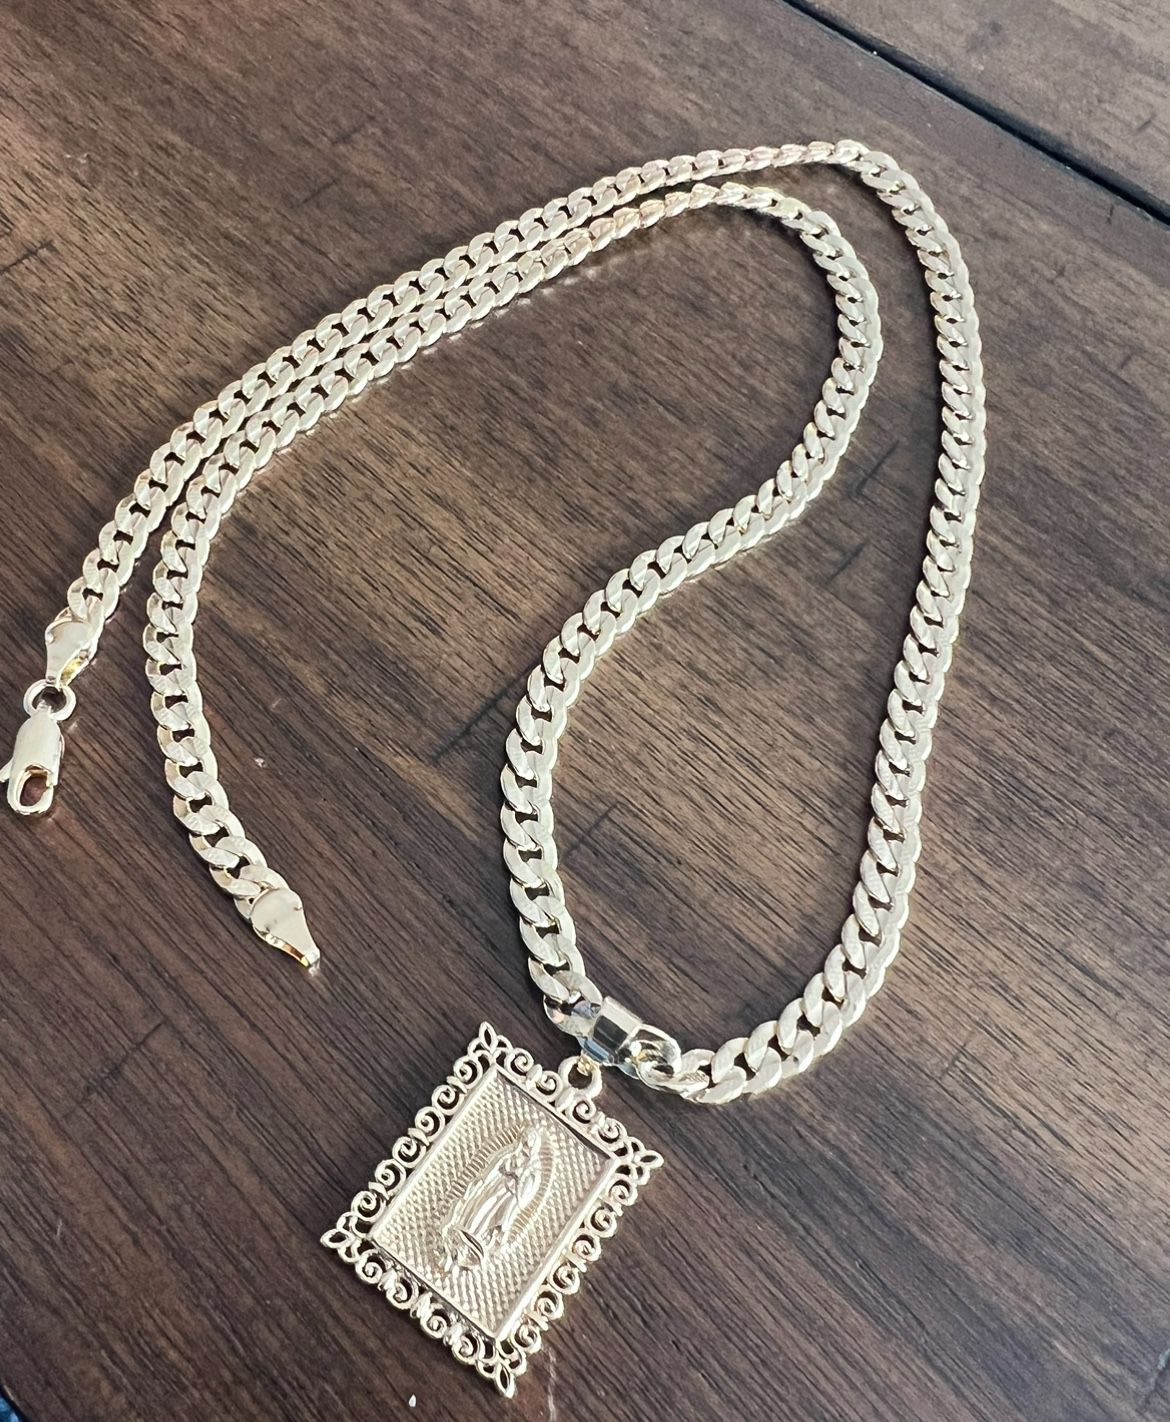 Gold Filled Cuban Chain With Square Virgin Pendant